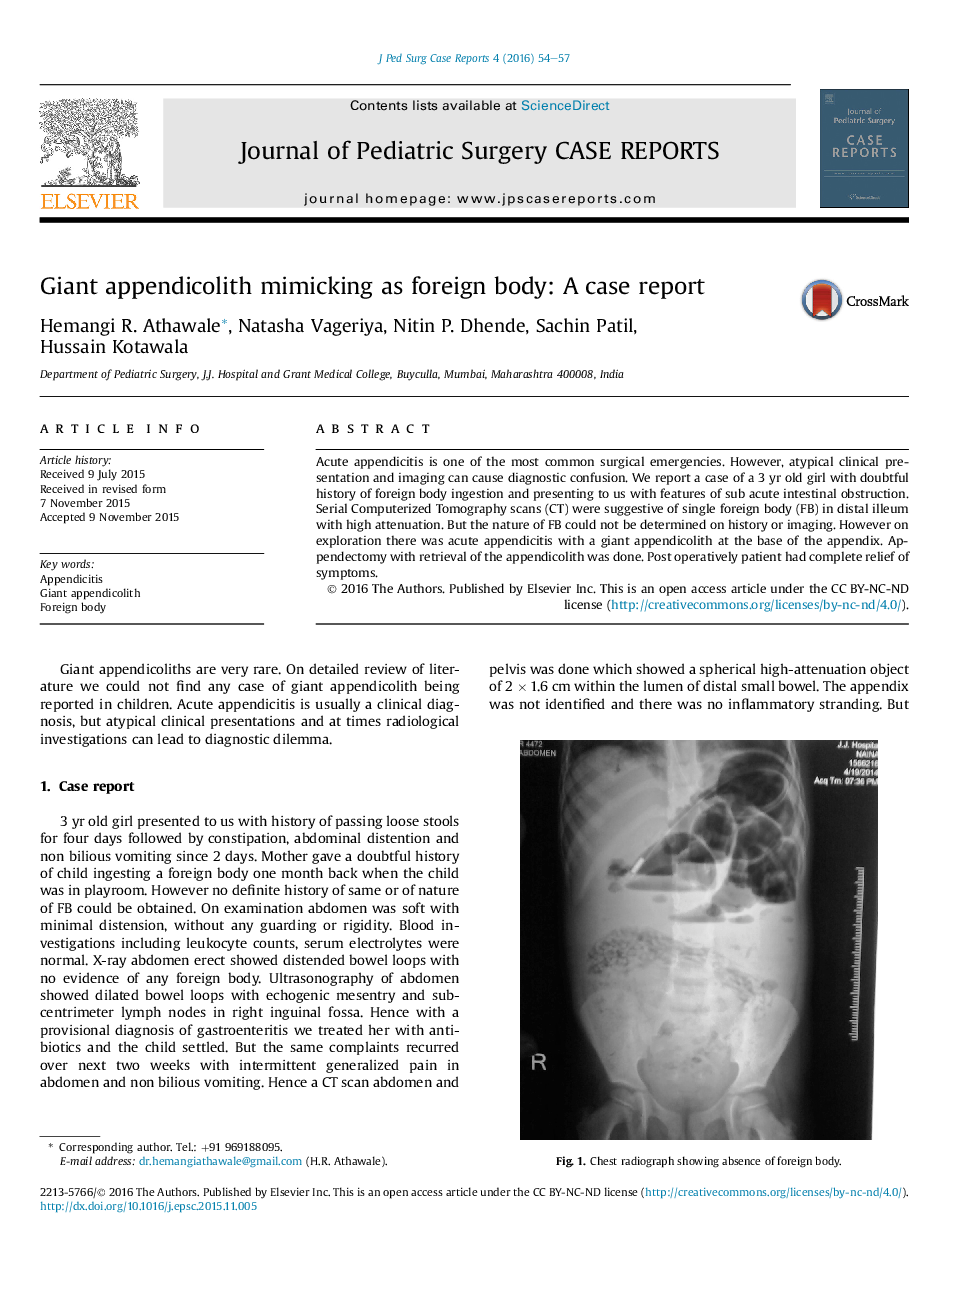 Giant appendicolith mimicking as foreign body: A case report